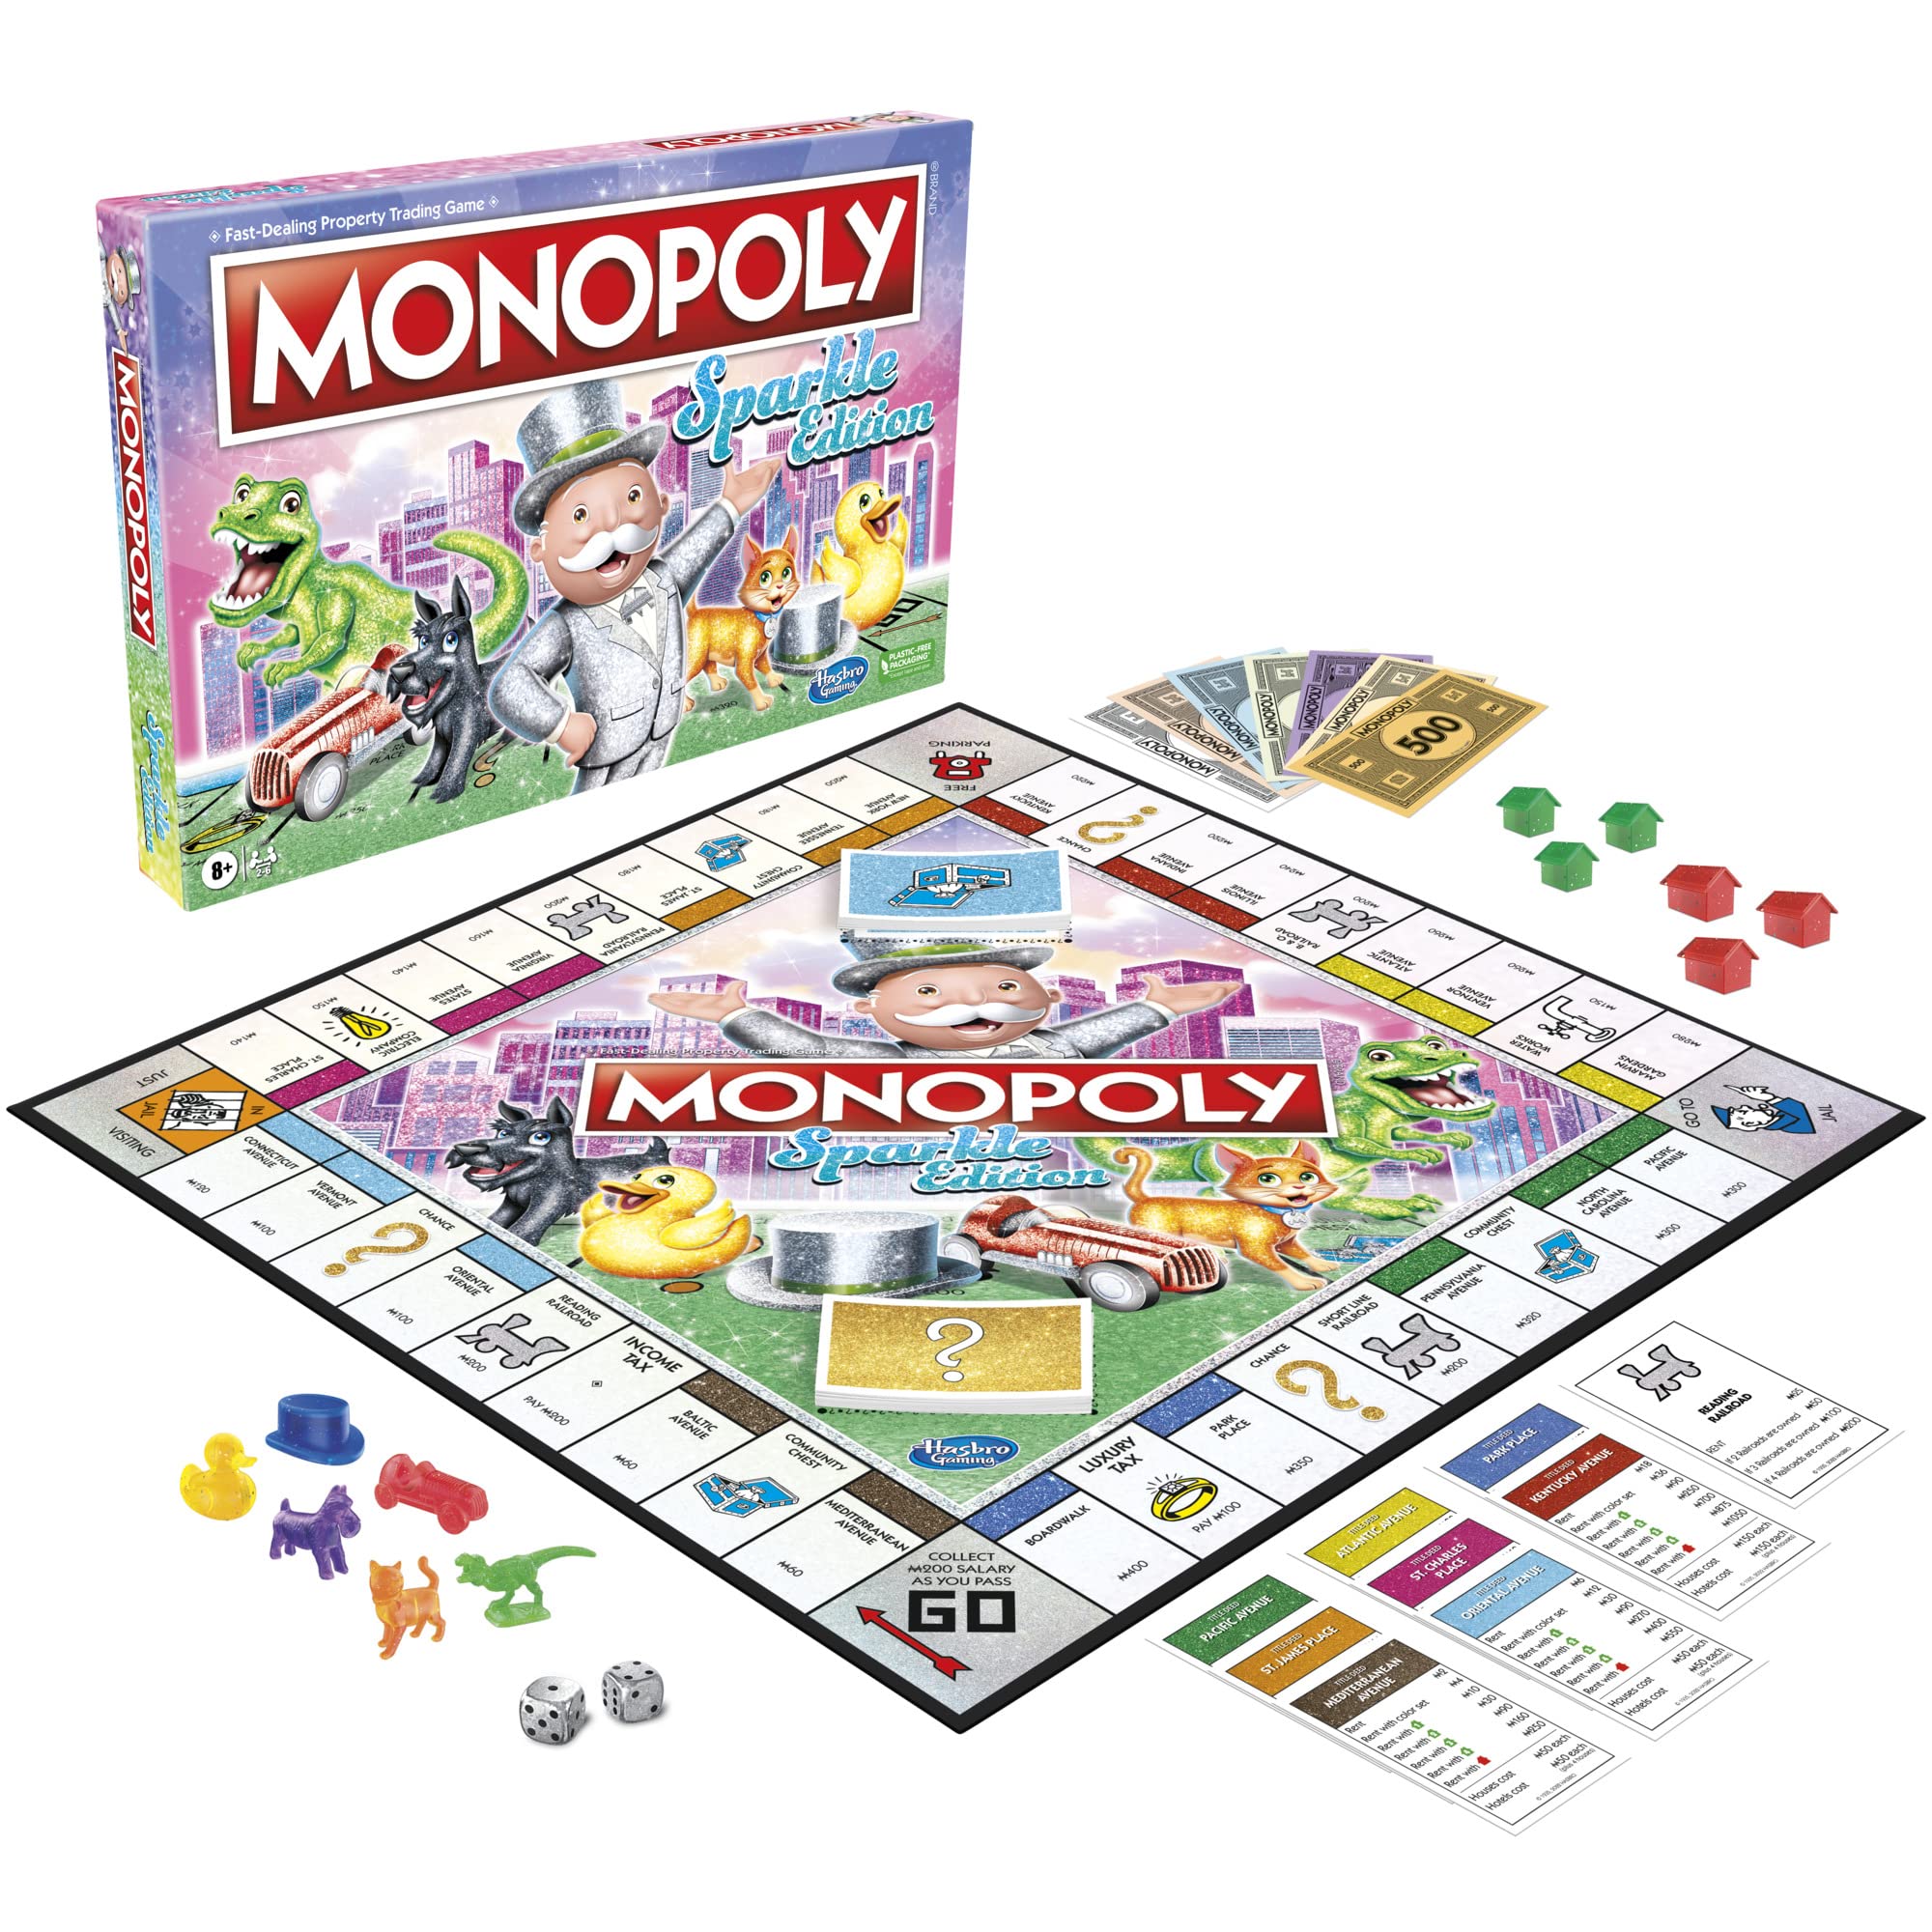 Monopoly Sparkle Edition Board Game, Family Games, with Glittery Tokens, Pearlescent Dice, Sparkly Look, (Amazon Exclusive), 2-6 players